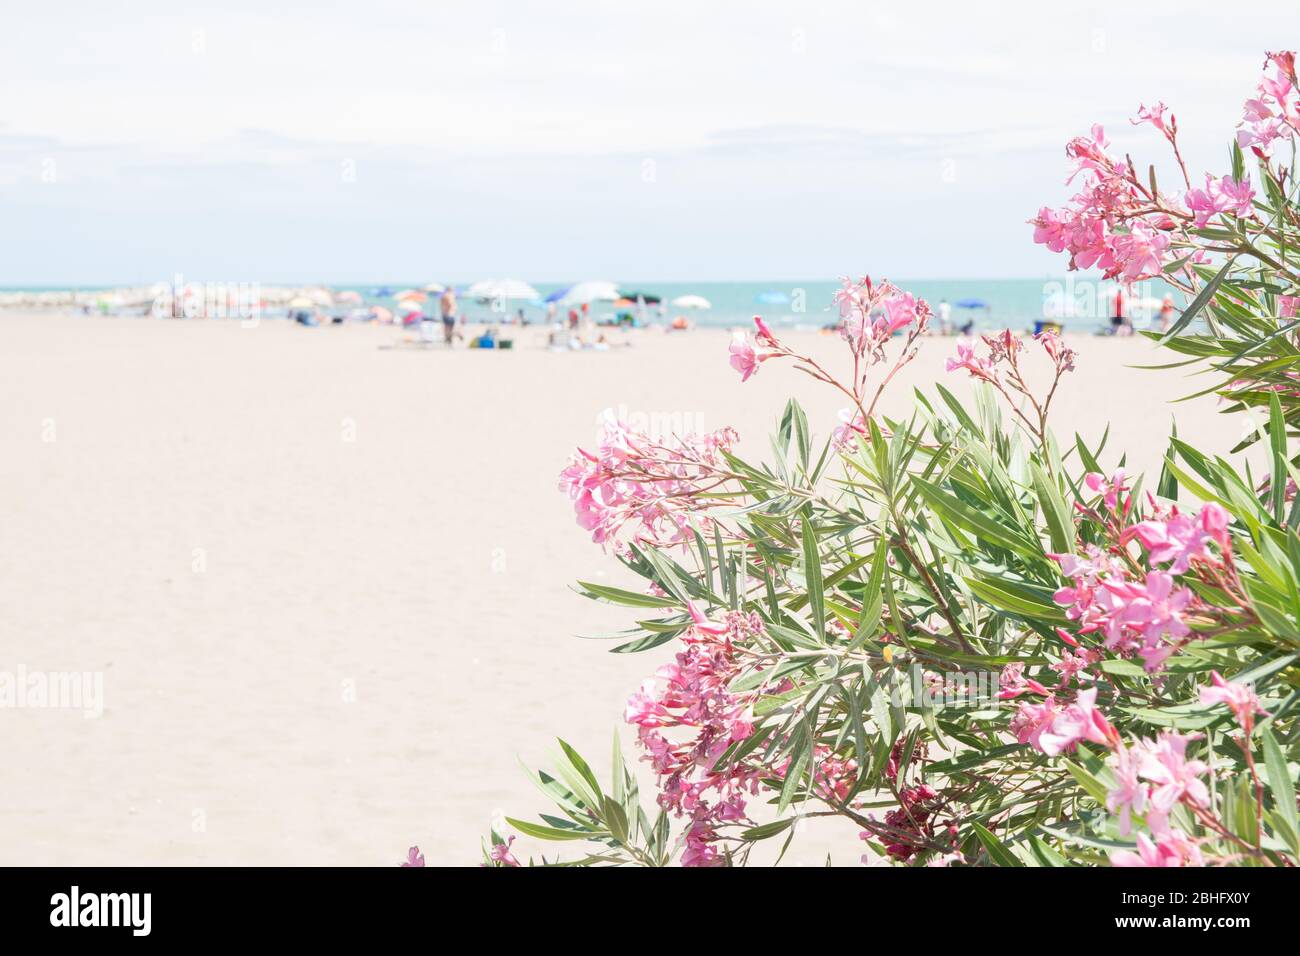 Pink oleander and beach on background in summertime. Stock Photo